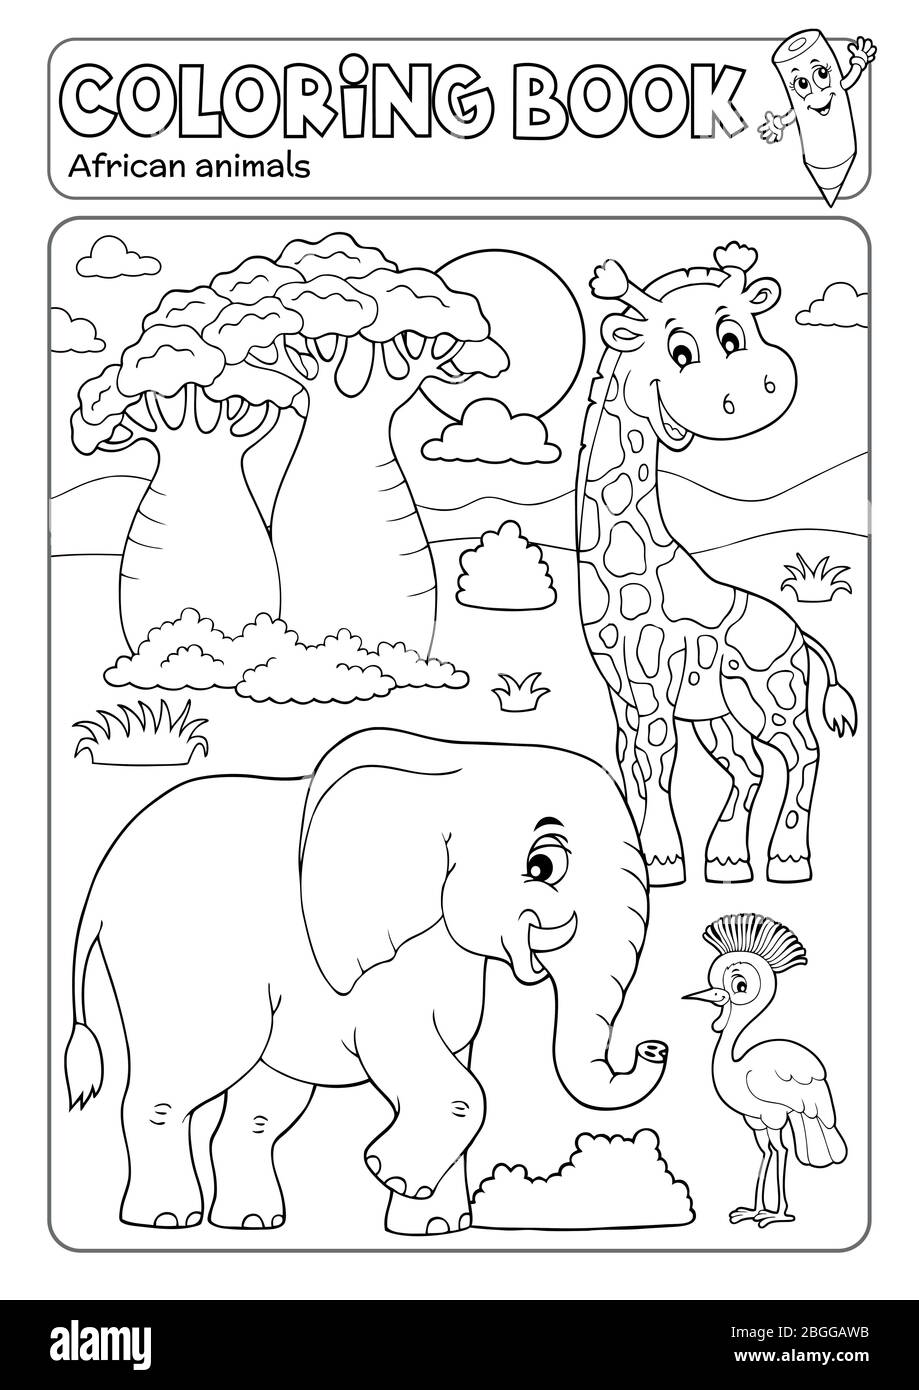 Coloring Book African Fauna 3 Eps10 Vector Illustration Stock Vector Image Art Alamy